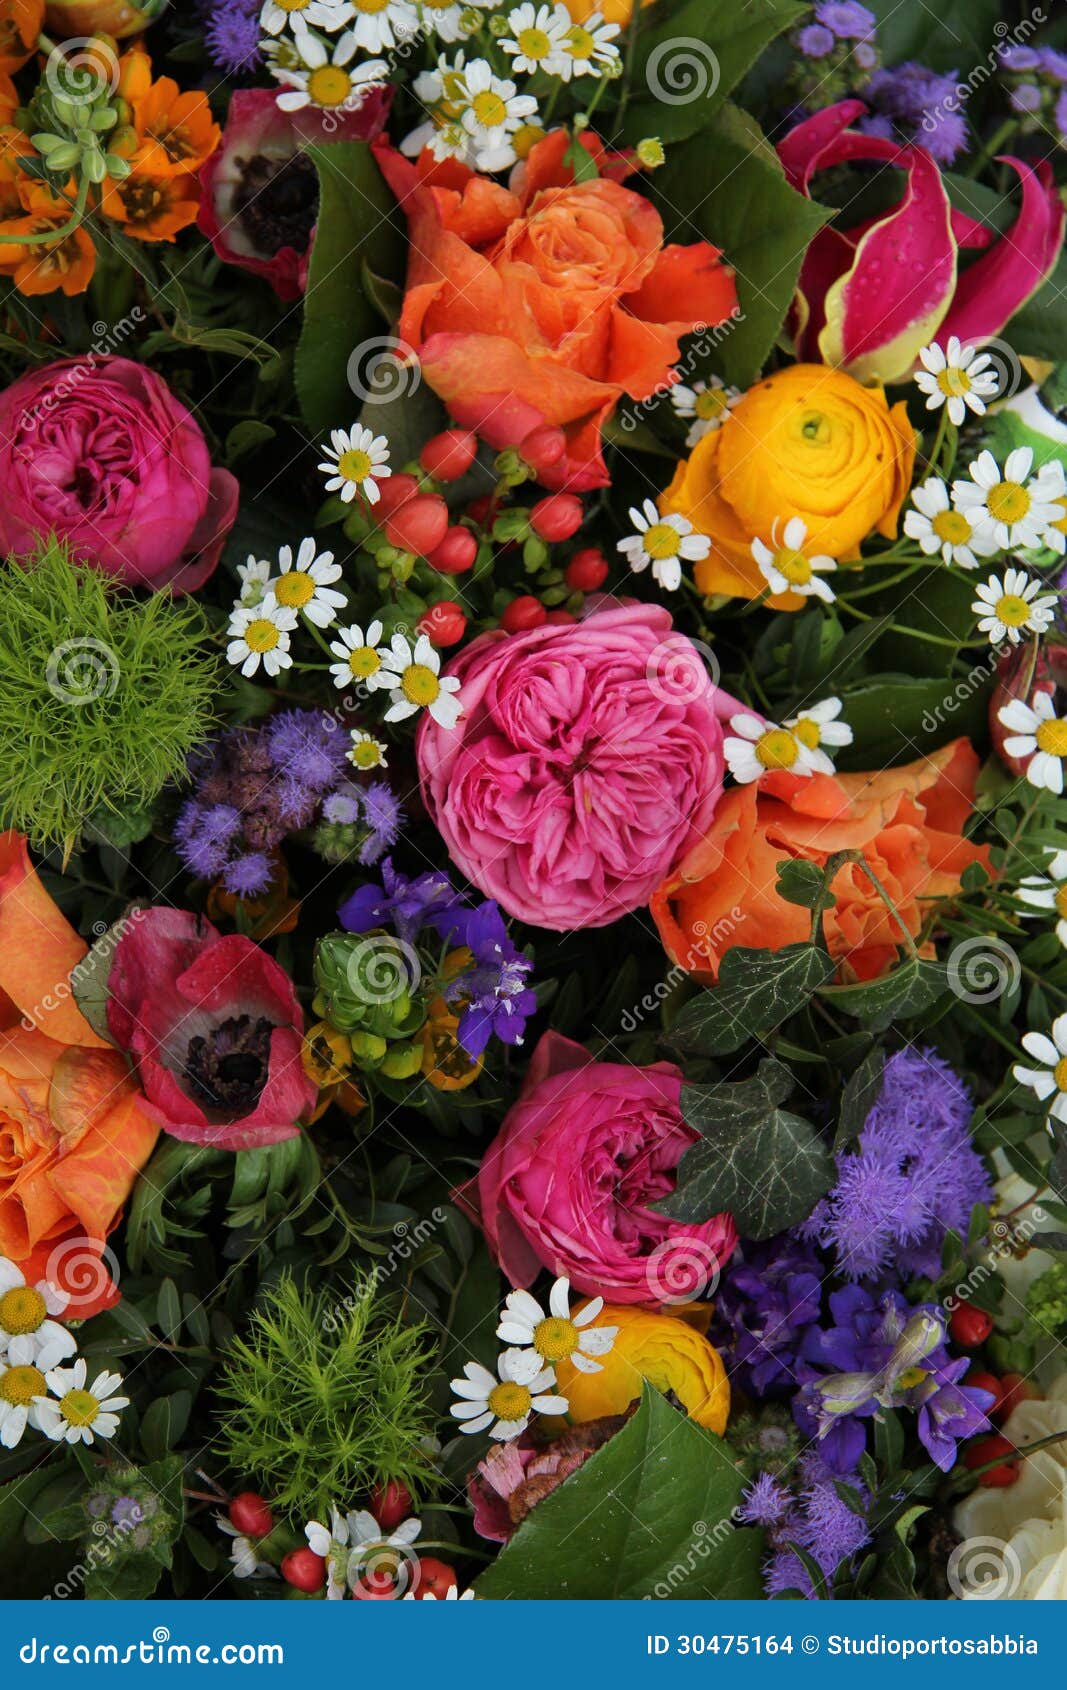 Mixed Spring Bouquet Stock Images - Image: 30475164